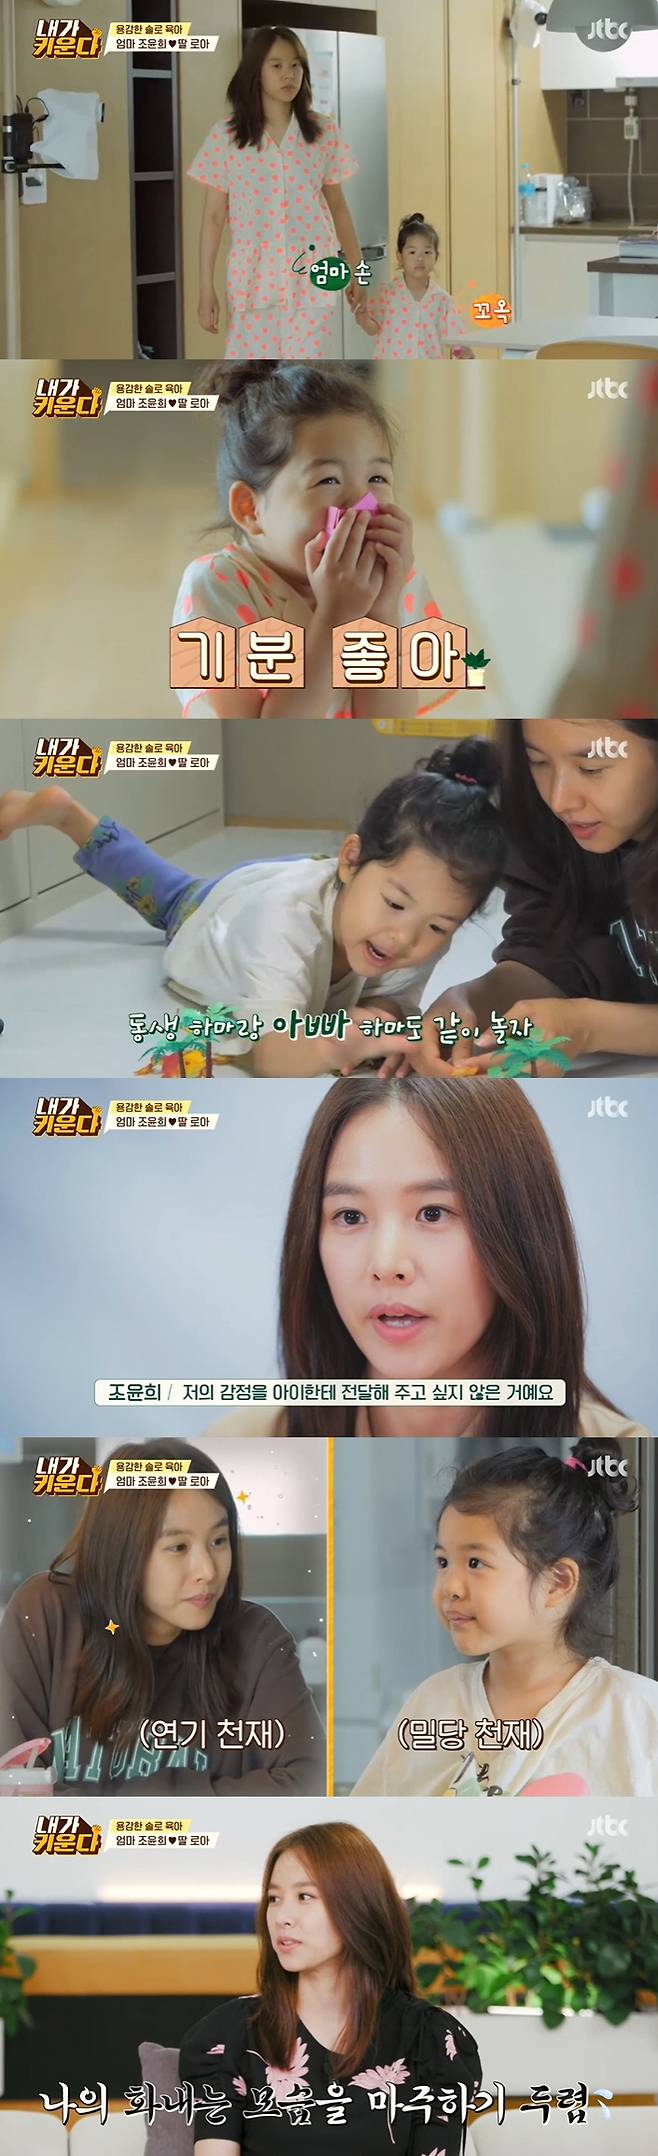 I raise Jo Yoon-hee and Kim Na-young showed their ideal mother.Jo Yoon-hee, Kim Hyun-Sook, and Kim Na-young are similar in JTBCs new entertainment Brave Solo Parenting - I Raise (hereinafter I Raise, Planning Hwang Gyo-jin, and Directed by Kim Sol), which was first broadcast at 9 p.m. on the 9th (Friday), but it reveals another and various Solo parenting daily life and viewers I gave him a laugh and sympathy.Kim Gura, Chae Lim, Jo Yoon-hee, Kim Hyun-Sook, and Kim Na-young gathered in one place on the day, set up a solo parenting sequence and started their first meeting pleasantly.Jo Yoon-hee, who became the main character of the first video, said, I wanted to challenge anything with Roar, and I wanted to make memories and I was courageous.Jo Yoon-hees house was filled with hearts for Roars growth and attracted attention.There was a picture in the living room where trampolines and slides instead of sofas, and instead of TV, imaginative stimulation.In Roars room, there is a separate space for reading, house play, origami, and the studios admiration was drawn with the interior of the Kalgak, which is hard to believe that it is a house with children.Early morning, Jo Yoon-hee, who has been playing classical and preparing for breakfast, is sticking to regular parenting, feeding Roar one egg every morning after his birth.At this time, Roar made everyone laugh with weather, lovely visuals to eat breakfast.Roar warmed his heart by giving his uncles where the camera was installed a sweet greeting: Hello.Roar also enjoyed playing house with his mother, and showed off his story composition and acting skills.Jo Yoon-hee also showed YouTube for a fixed time only when eating for Roar without eating, allowing him to learn the concept of numbers and eat hard.Jo Yoon-hee showed off her unusual mothers appearance, saying that parenting was a constitution: I hope Roar becomes a free child.I want to be a subjective mother. In particular, Jo Yoon-hee played an endless situation with Roar as an actor mother.During the play, Roar frequently mentioned Father, and Jo Yoon-hee also listened to it without awkwardness.Jo Yoon-hee said, Some houses seem to have a house that is burdensome to even say words, but I did not want to do it to Roar.I did not want to convey my feelings about Father to my child. Roar is a child who is loved by Father, but he does not live in one house.So Roar is so in favor of meeting Father, and now I meet once at One Week, but if I want to go on two or three times, I will be active in making many good memories with Father whenever I want to travel. Shin-Urayasu Station and Lee Joons mother Kim Na-young then unveiled everyday life such as Grave Manga.Kim Na-young tried to put Shin-Urayasu Station and Lee Joon back to bed at 6:30 am, but the two brothers boasted full energy and did not allow their mother to sleep.Kim Na-young showed a lot of affection for the children to say that he only saw the first floor close to the nursery when he was looking for a house for Shin-Urayasu Station and Lee Joon.Kim Na-young, who started playing with his two sons shortly after the weather, showed a teamwork reminiscent of the entertainment program.Kim Na-young also showed a mother who broke up with customized parenting for children of different tendencies.He found a solution by sharing a troublesome consultation with his brother Shin-Urayasu Station, who is like a naughty when Lee Joon, a delicate emotional owner, is talking.I was also friends with my children, such as talking and touching, and I was always impressed by my efforts to give fair love to my two brothers.Kim Na-young said, I want to be a good mother. I hope that the children will be able to be comfortable when they think about mother later.After finishing the meal, he is preparing for the advertisement with the children in earnest, and he is looking forward to the next broadcast whether he can go out after preparing smoothly.In this first episode of I Raise, I showed a variety of parenting and gave me impressions and fun, especially as an opportunity to look into the various shapes of life in the world.Not only those who are doing sol-parenting, but also sharing meaningful time to learn pleasant daily life and parenting tips, comforting and cheering for someone and laughing for someone.